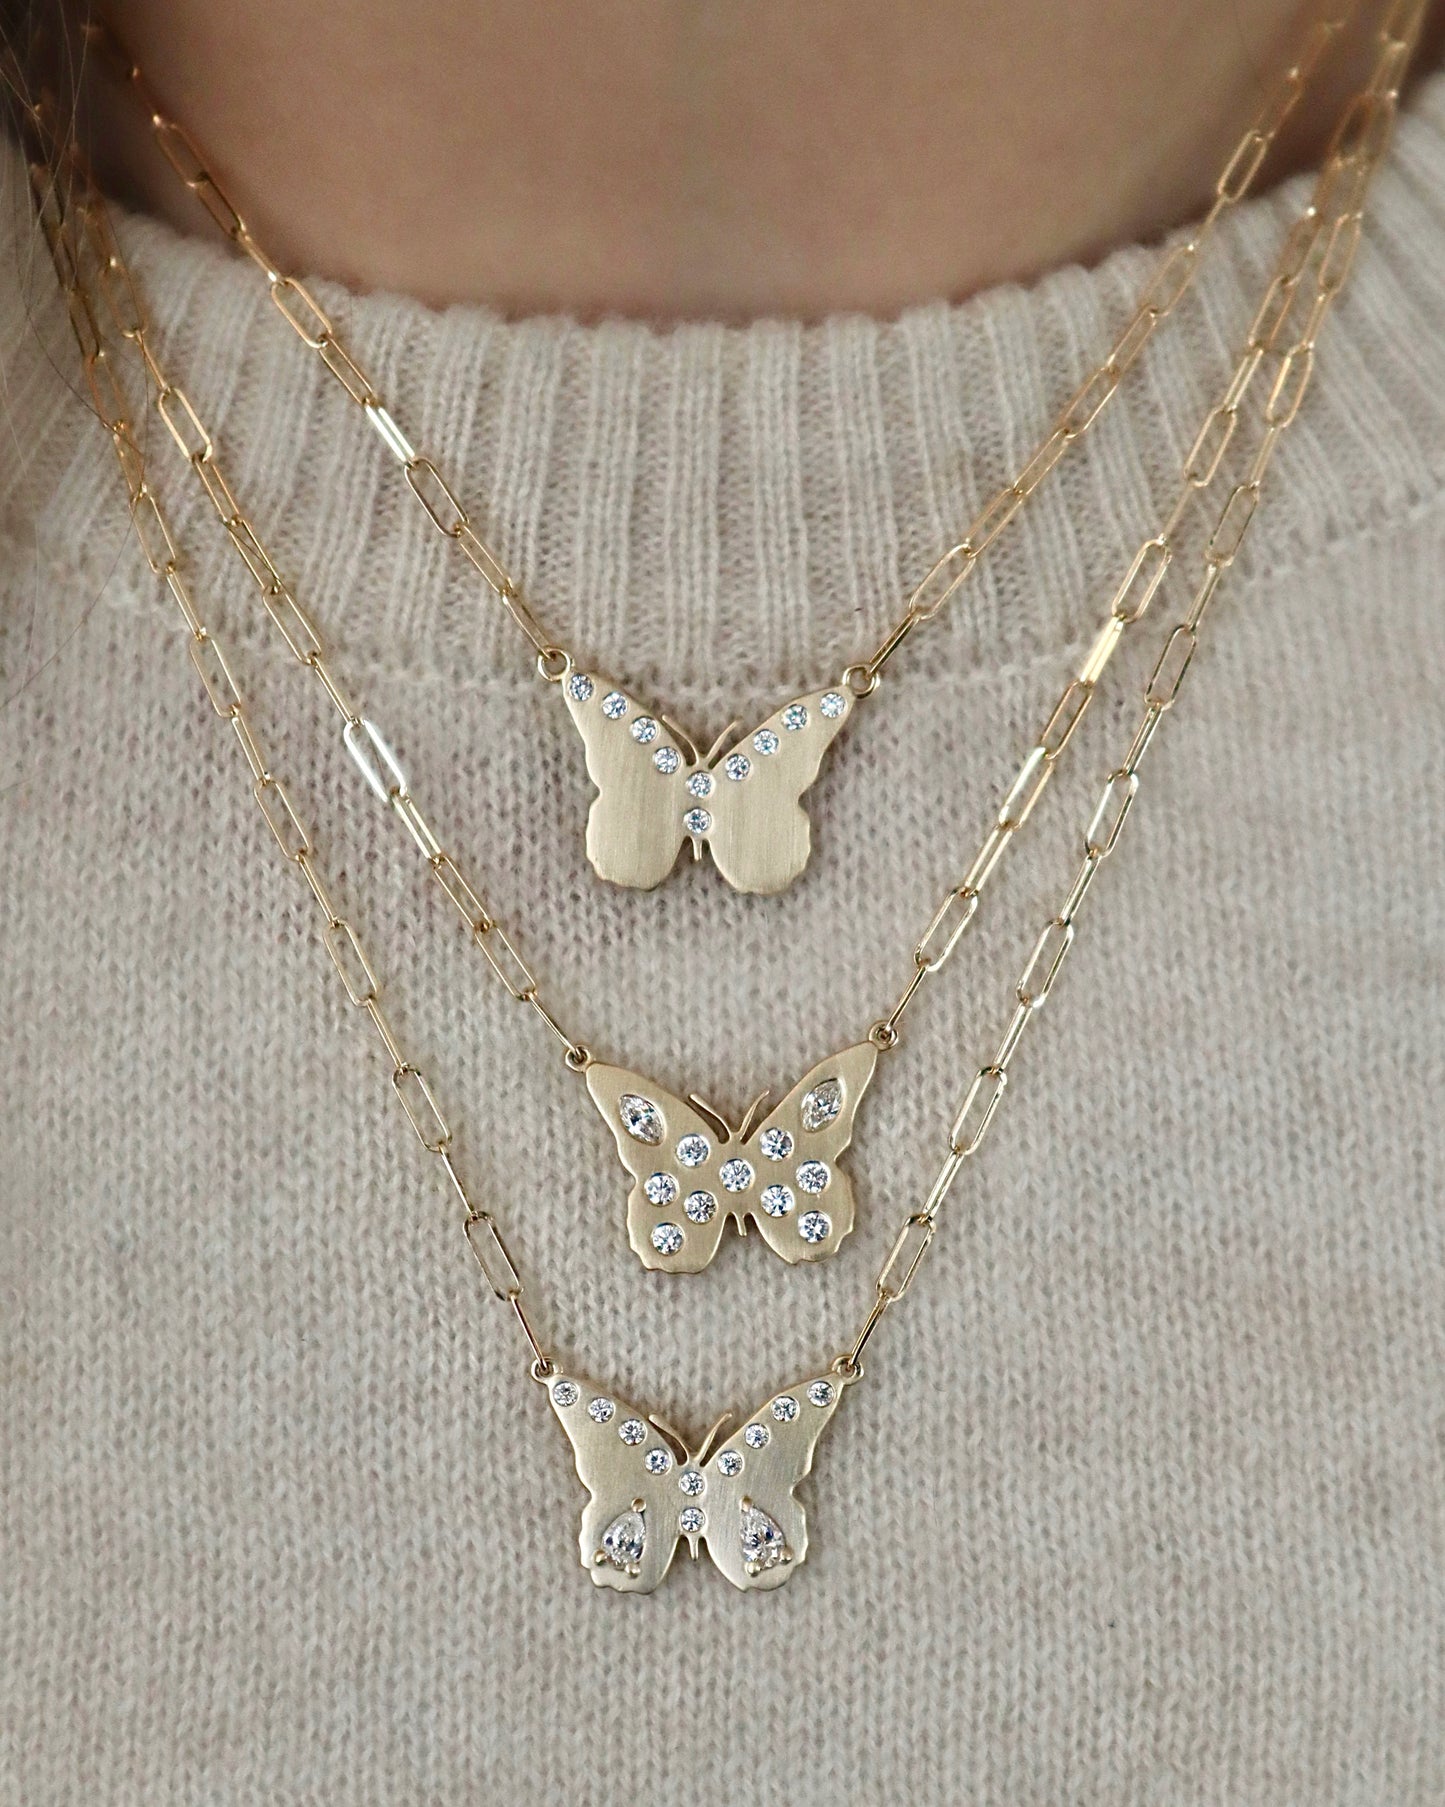 Evie Small Butterfly Necklace - Diamonds